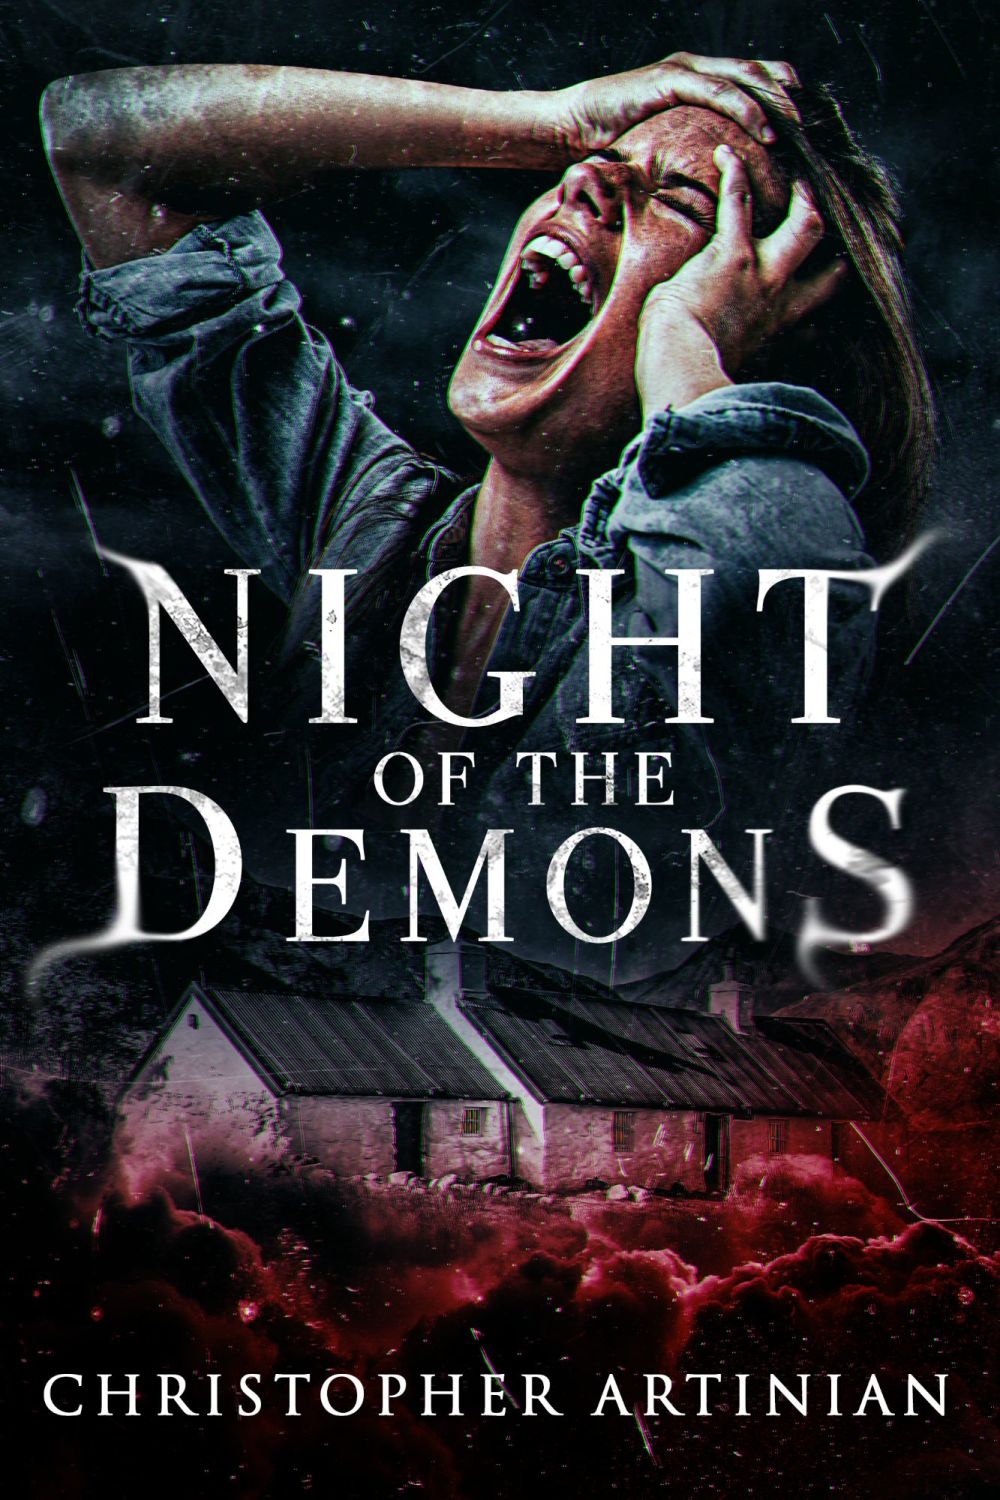 NIGHT OF THE DEMONS (SIGNED PAPERBACK)